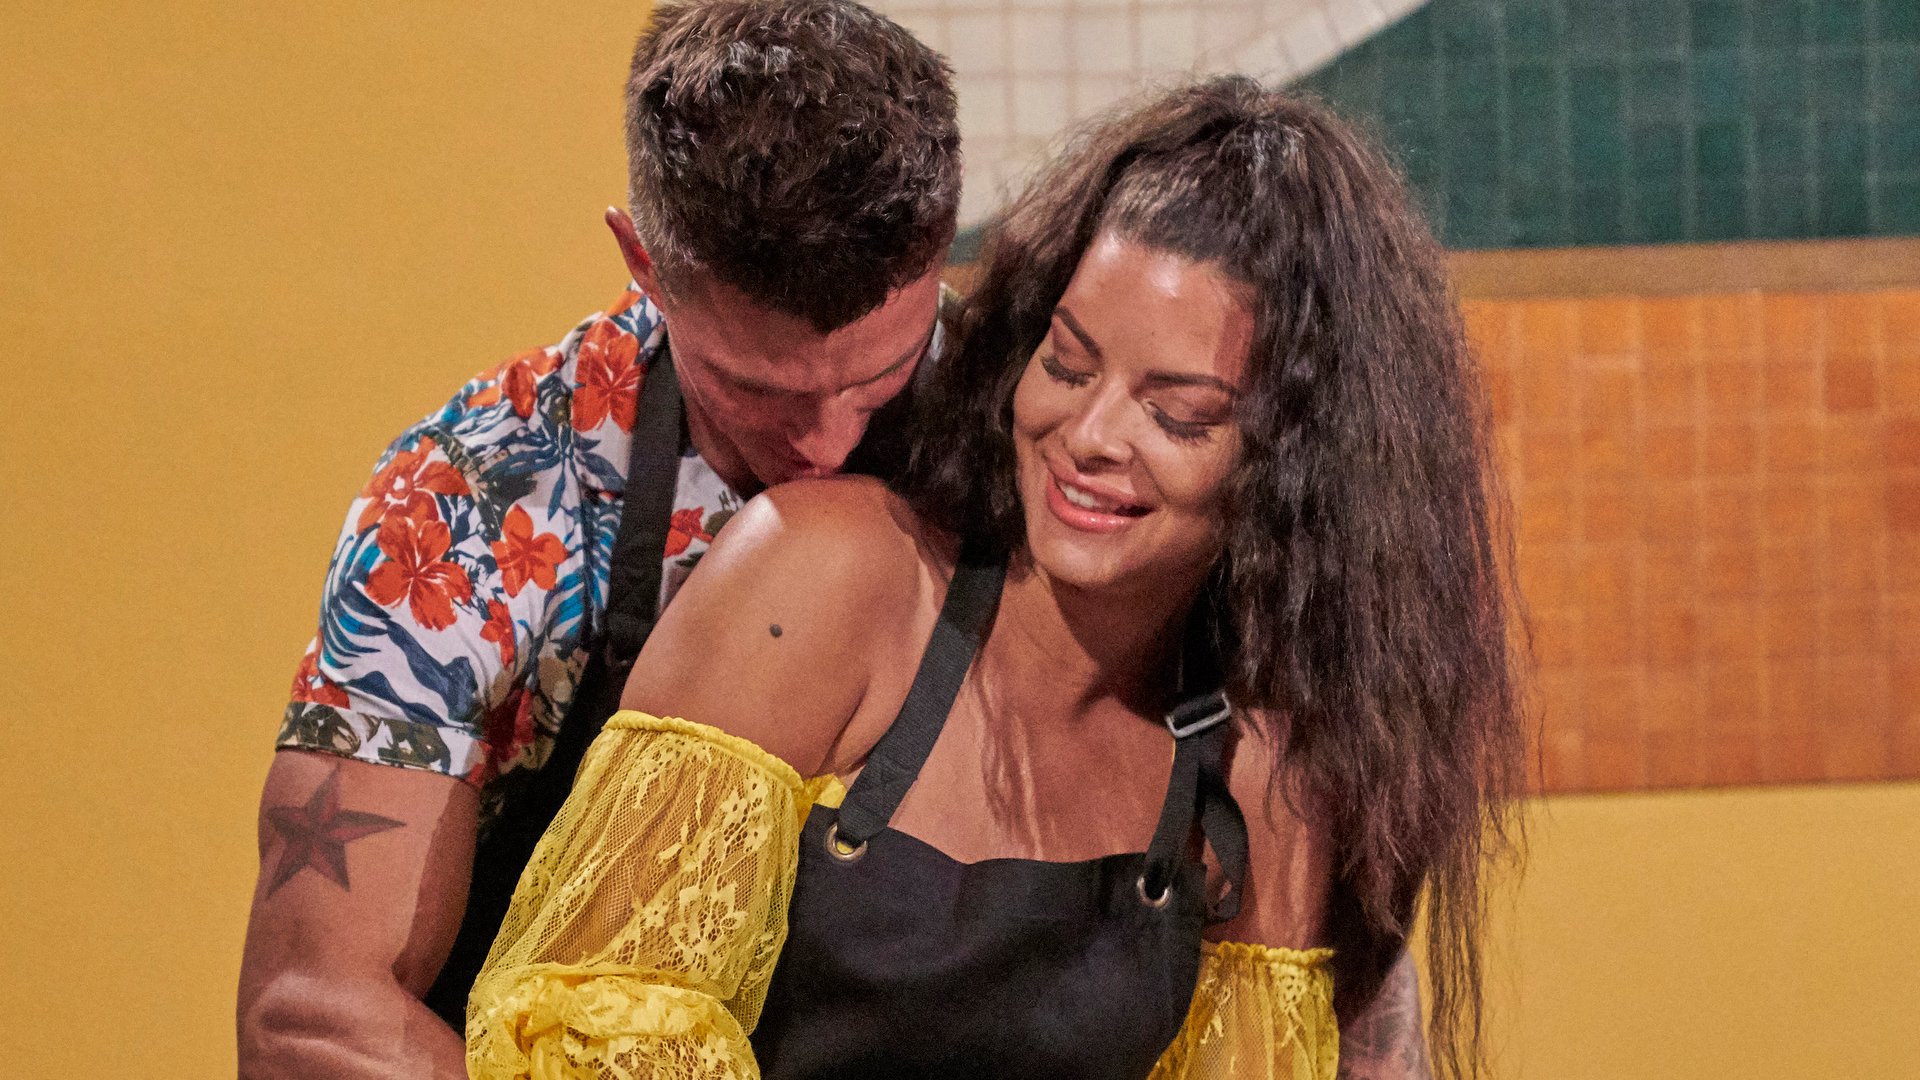 Kenny Braasch and Mari Pepin-Solis cooking together on their date in ‘Bachelor in Paradise’ Season 7